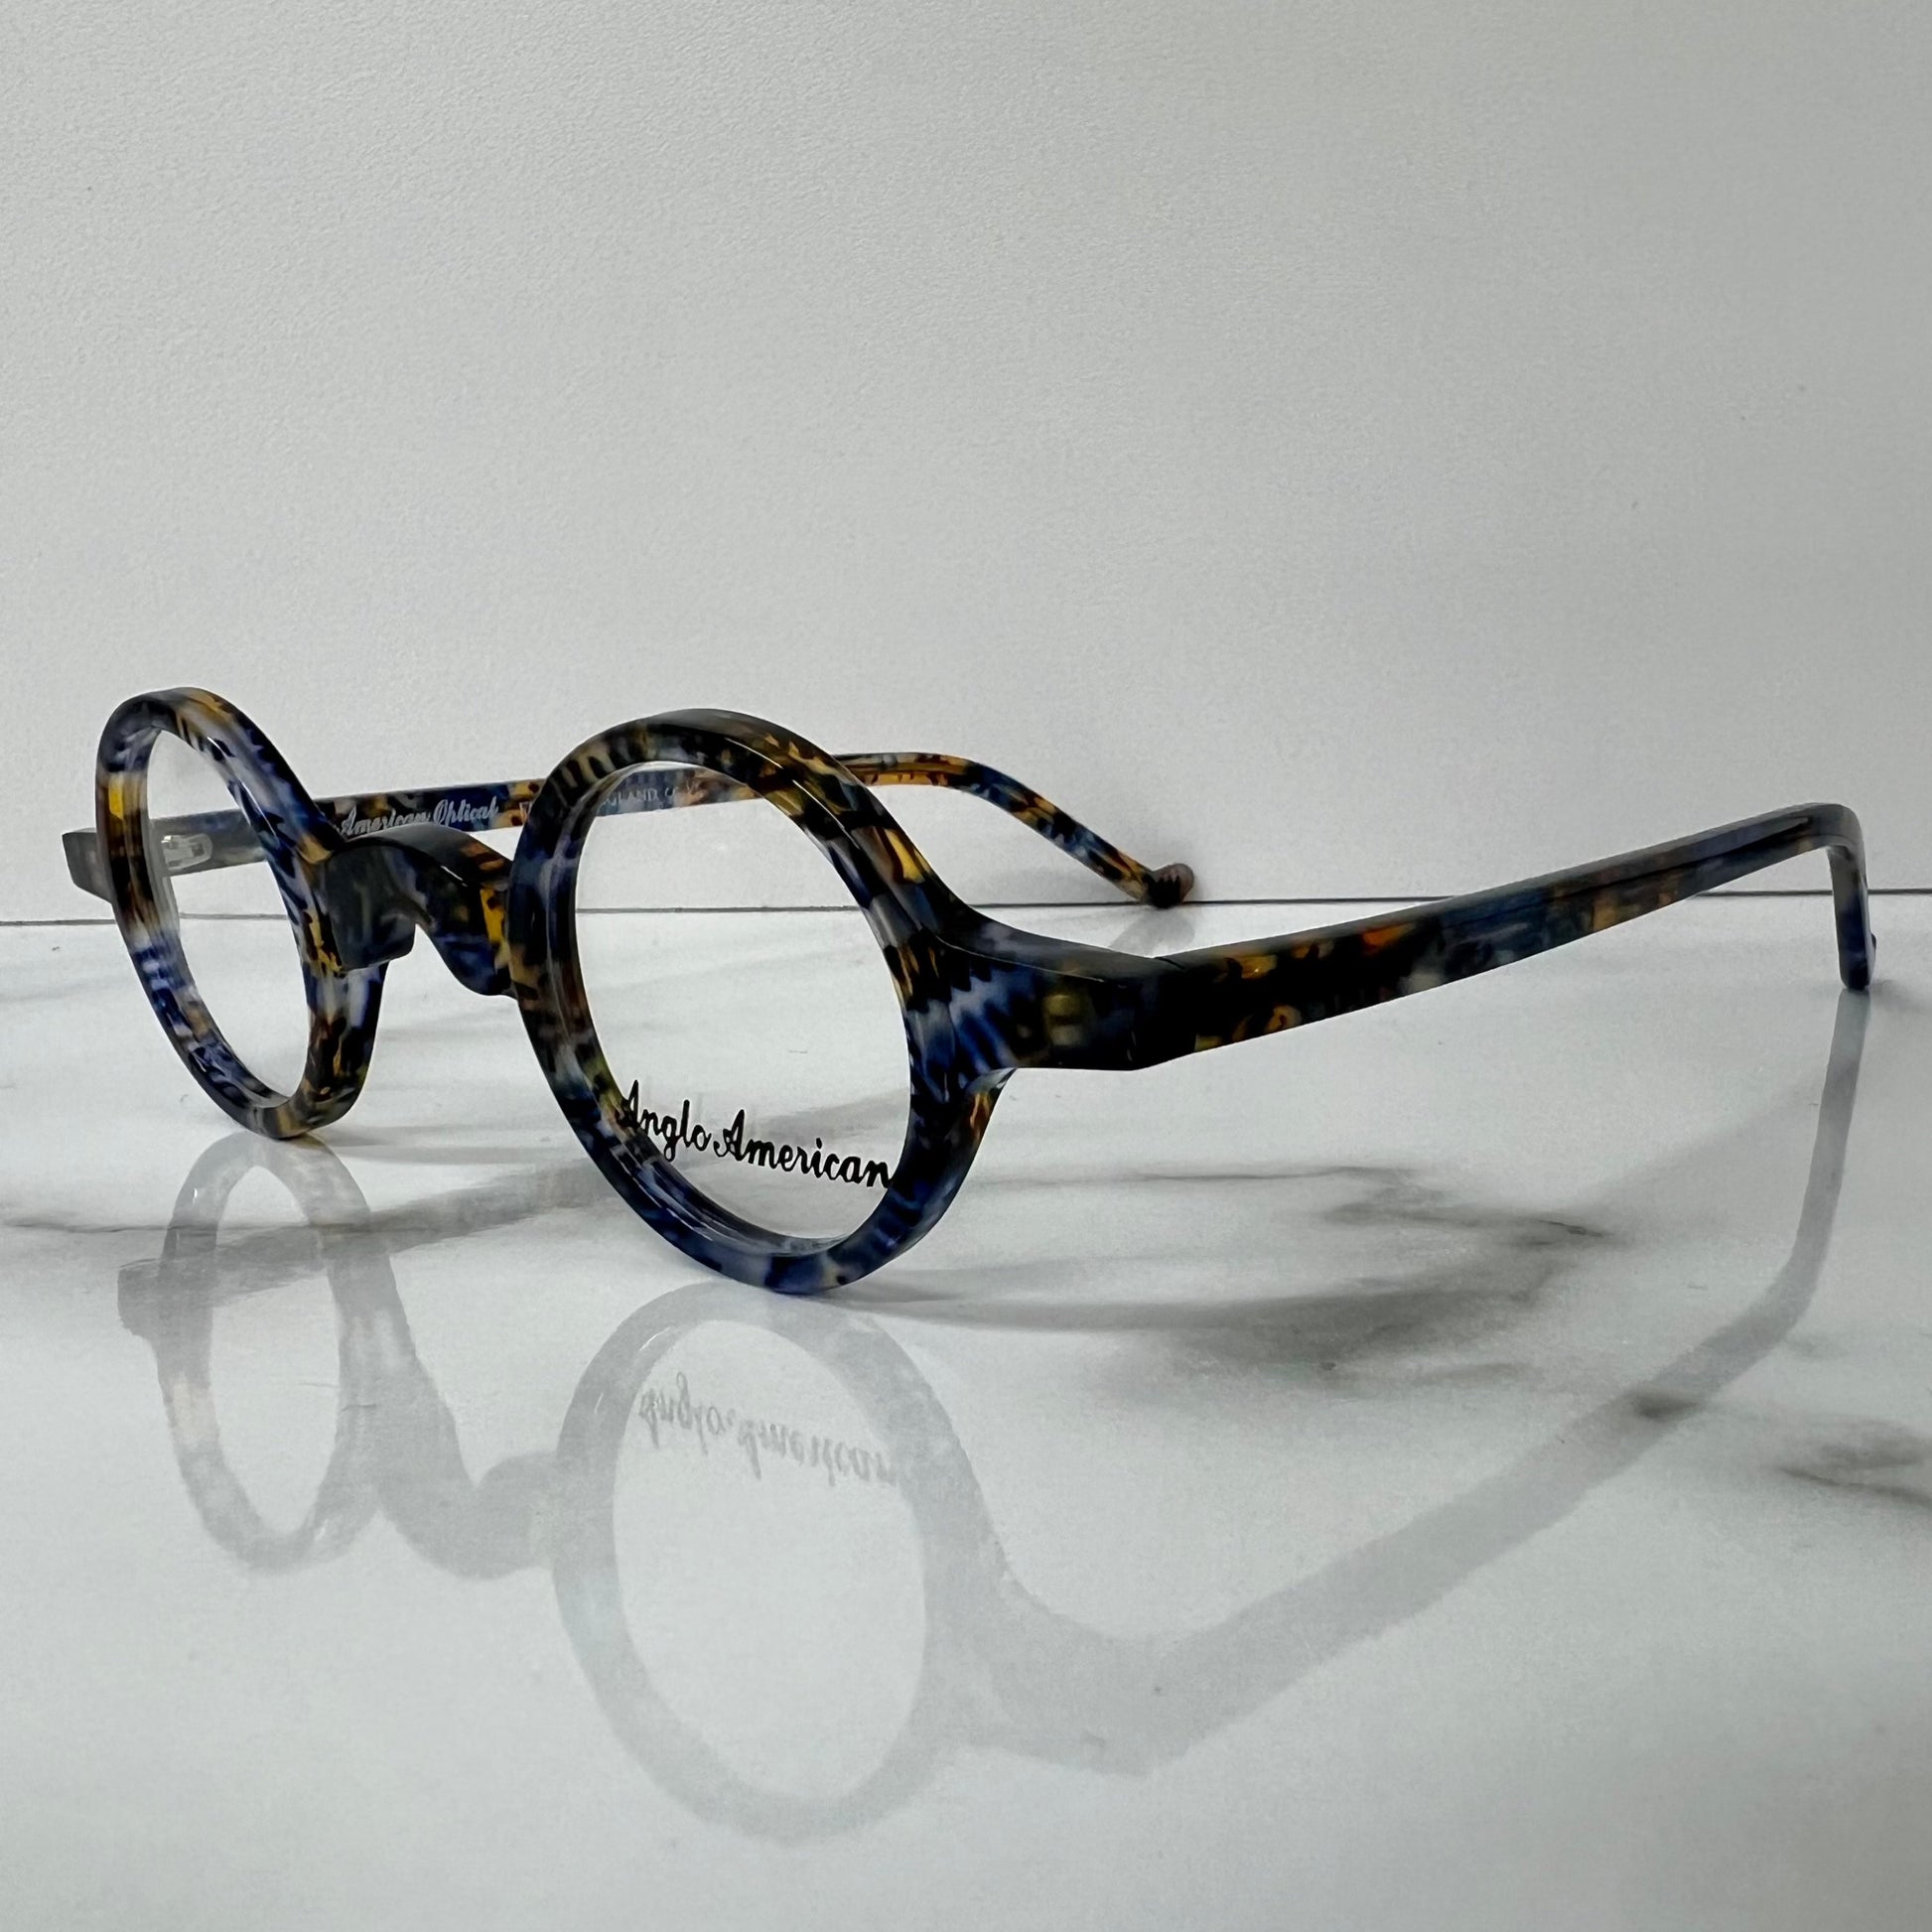 Anglo American Groucho Glasses Frames ABSH Mulitcoloured Round London Eyewear.